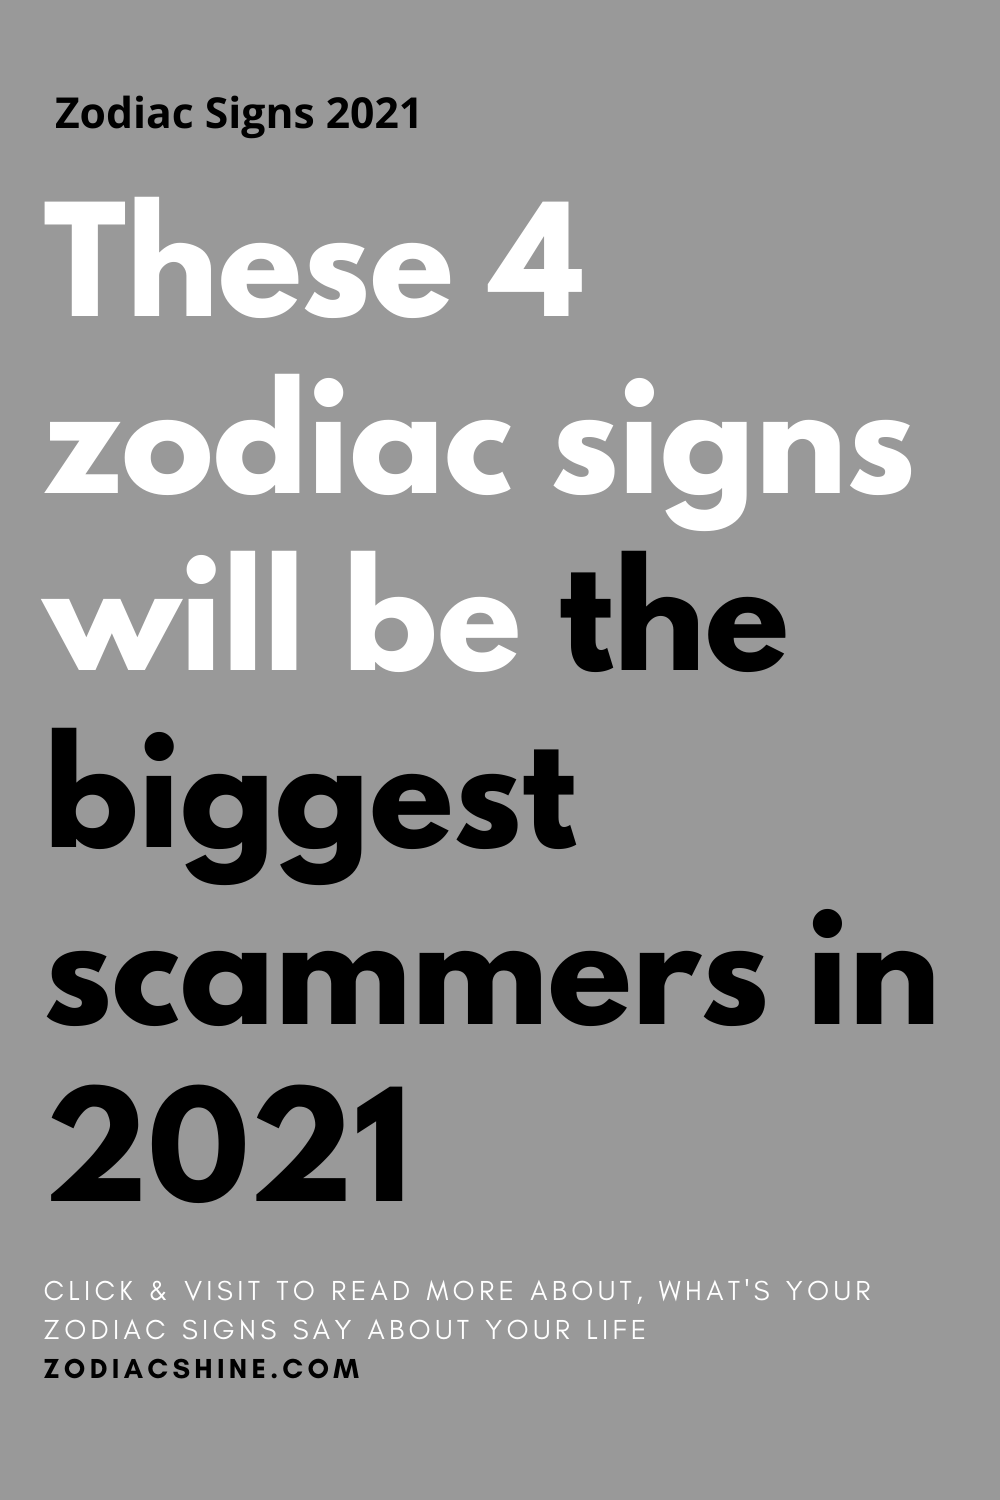 These 4 zodiac signs will be the biggest scammers in 2021